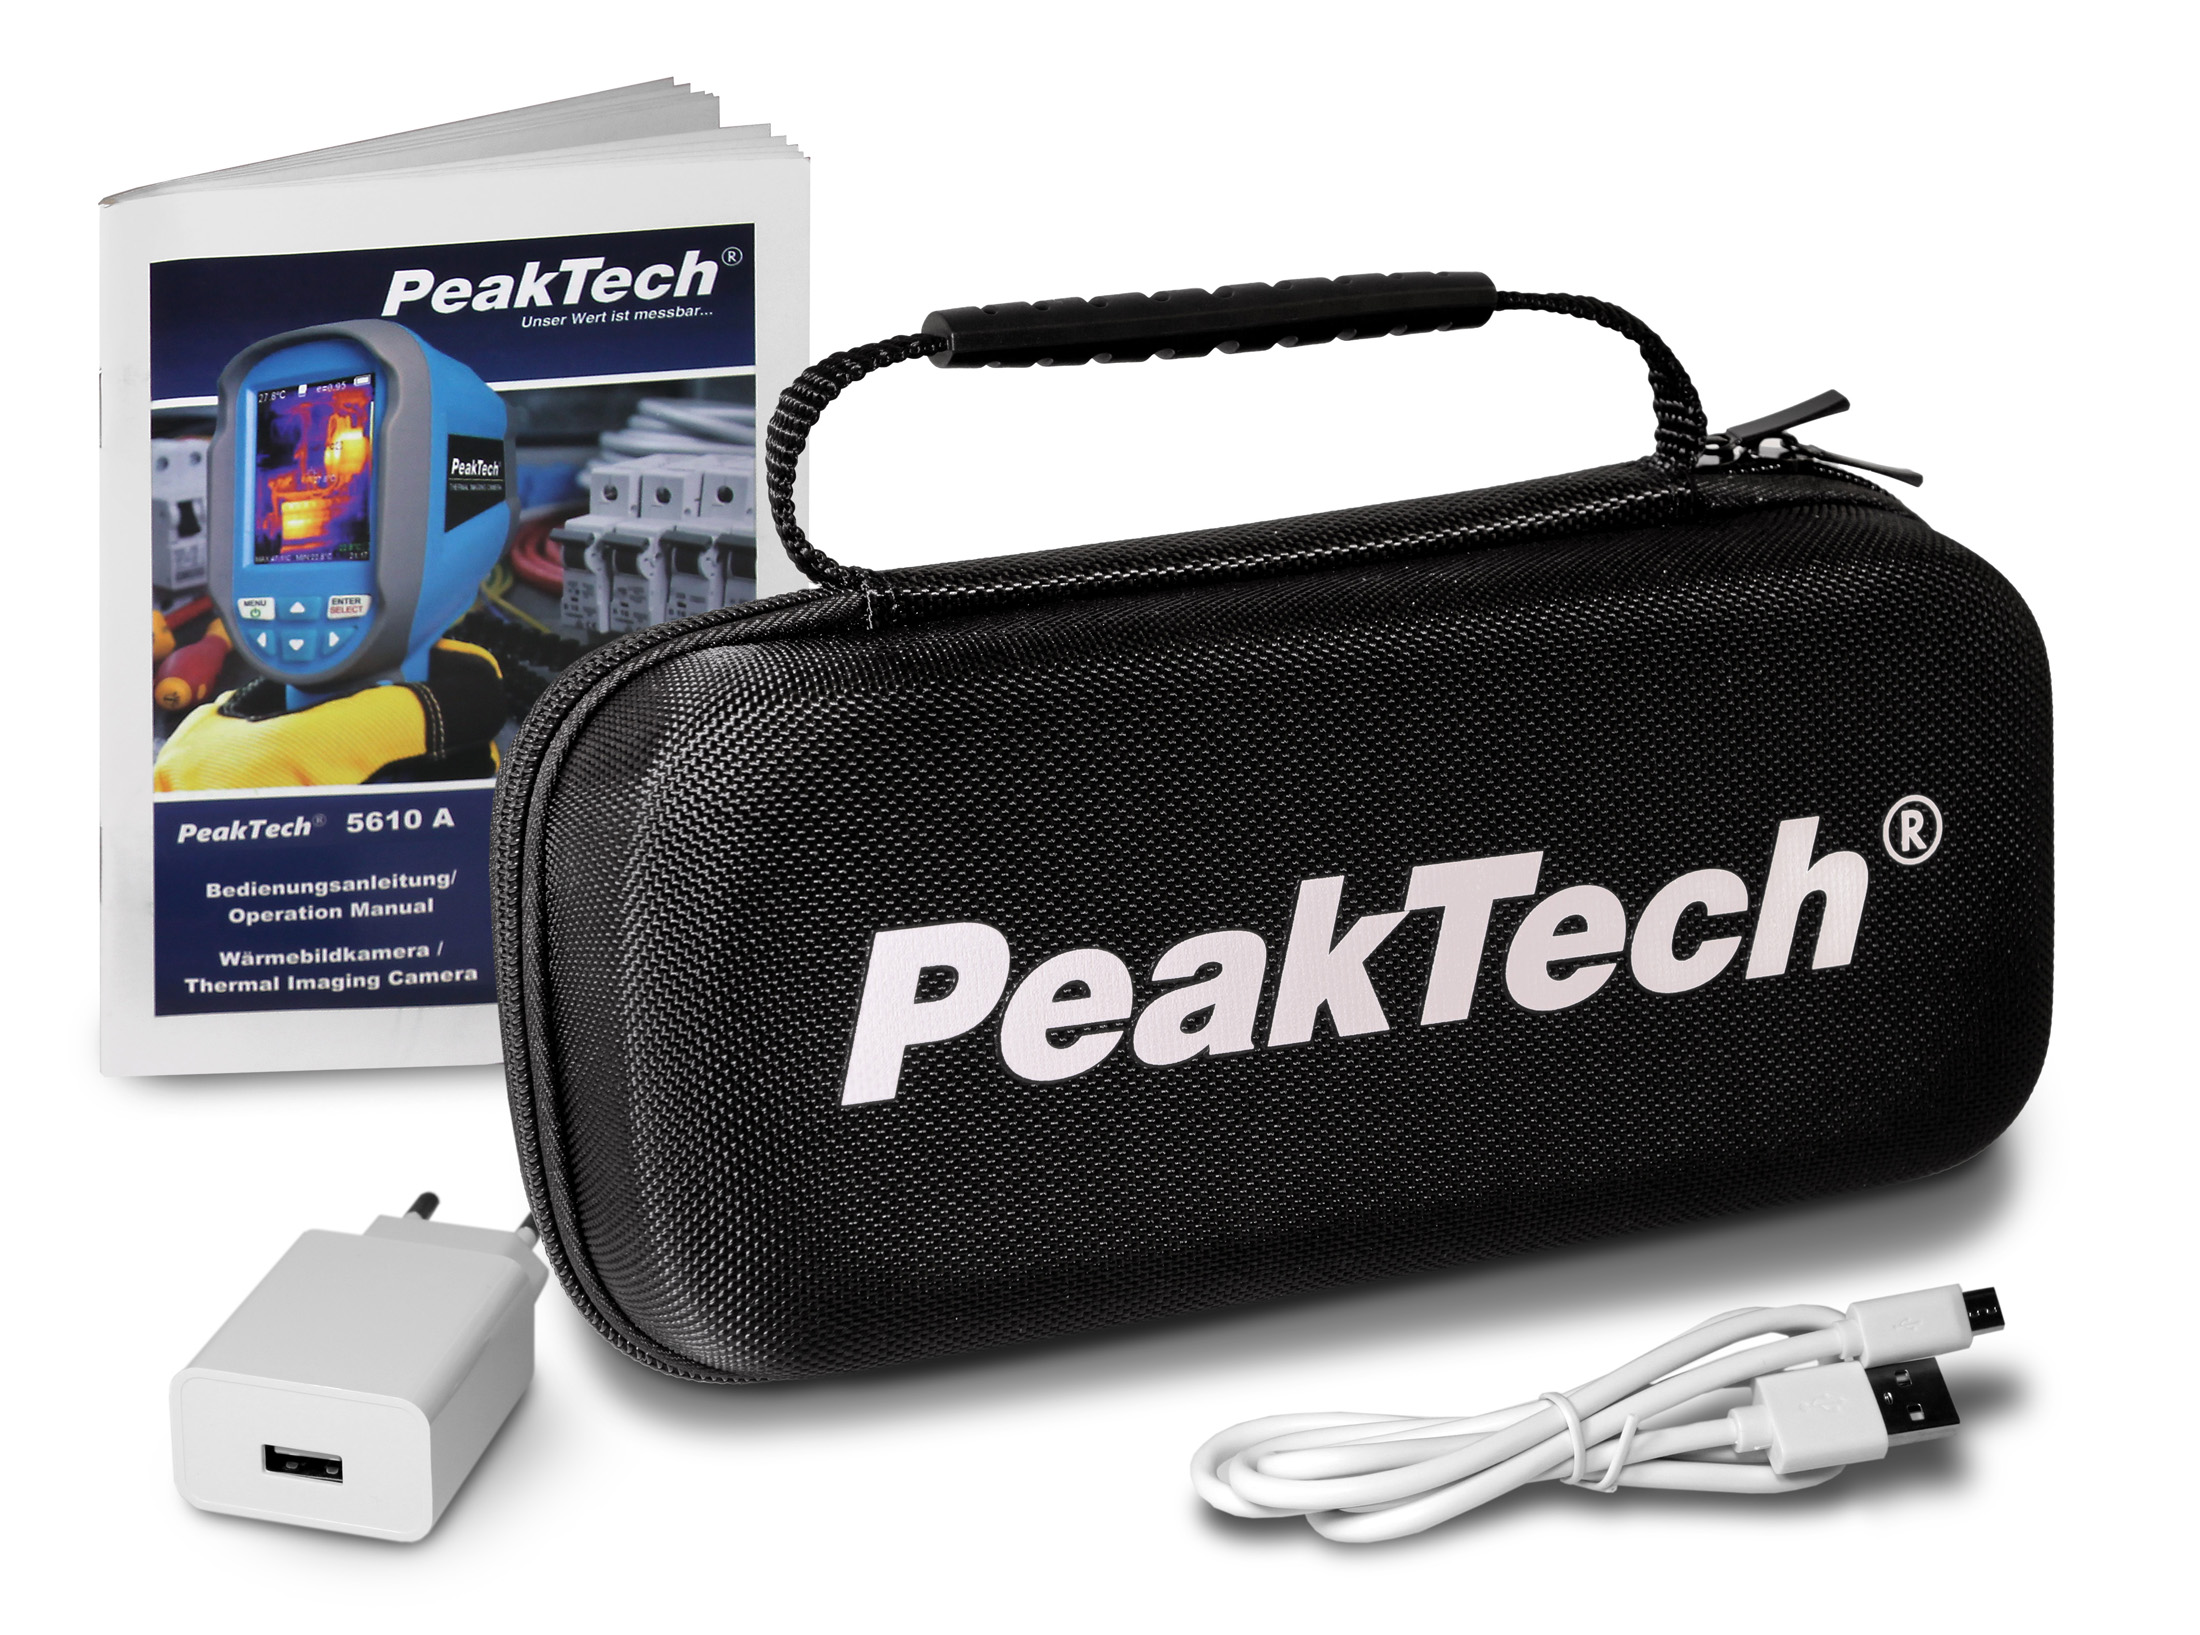 «PeakTech® P 5610 A» Thermal Imaging Camera with photo recording, USB